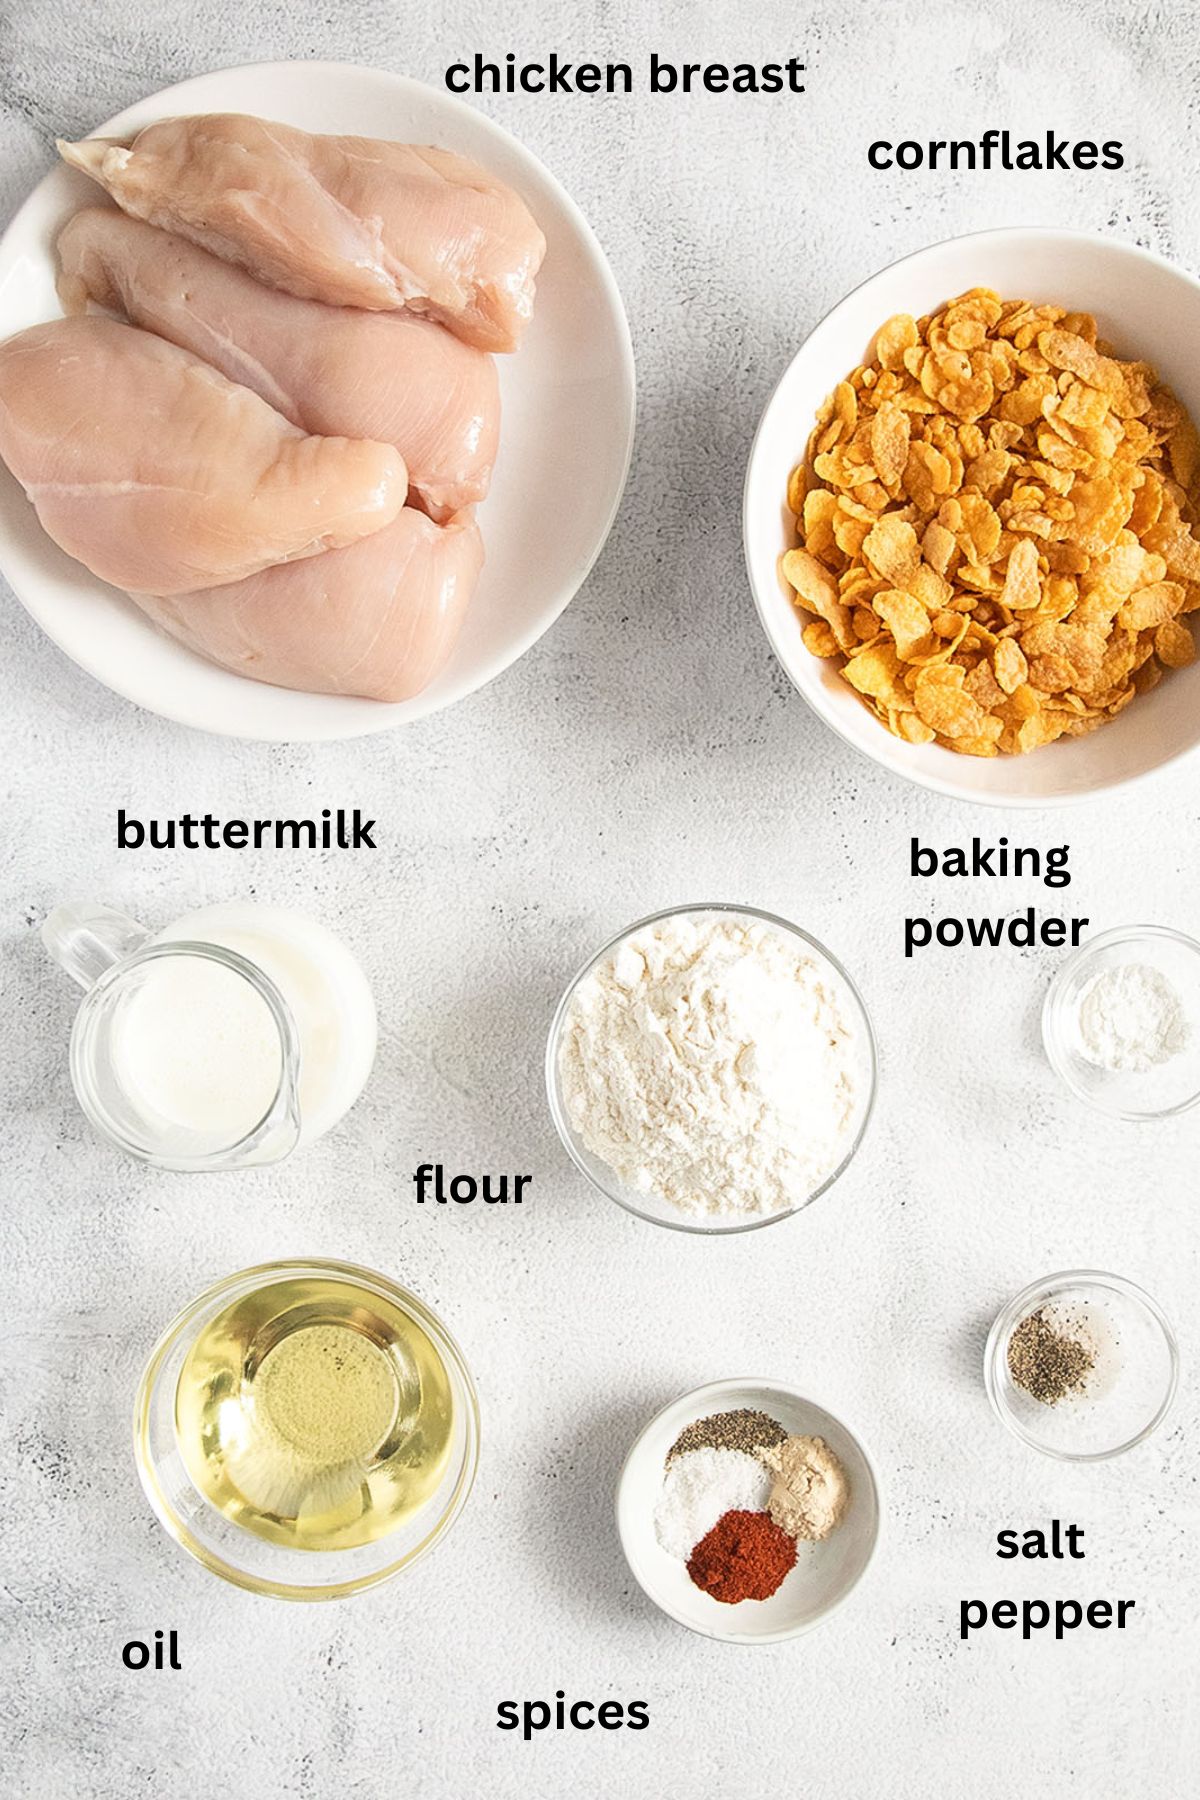 listed ingredients for fried chicken for crispy chicken burger.